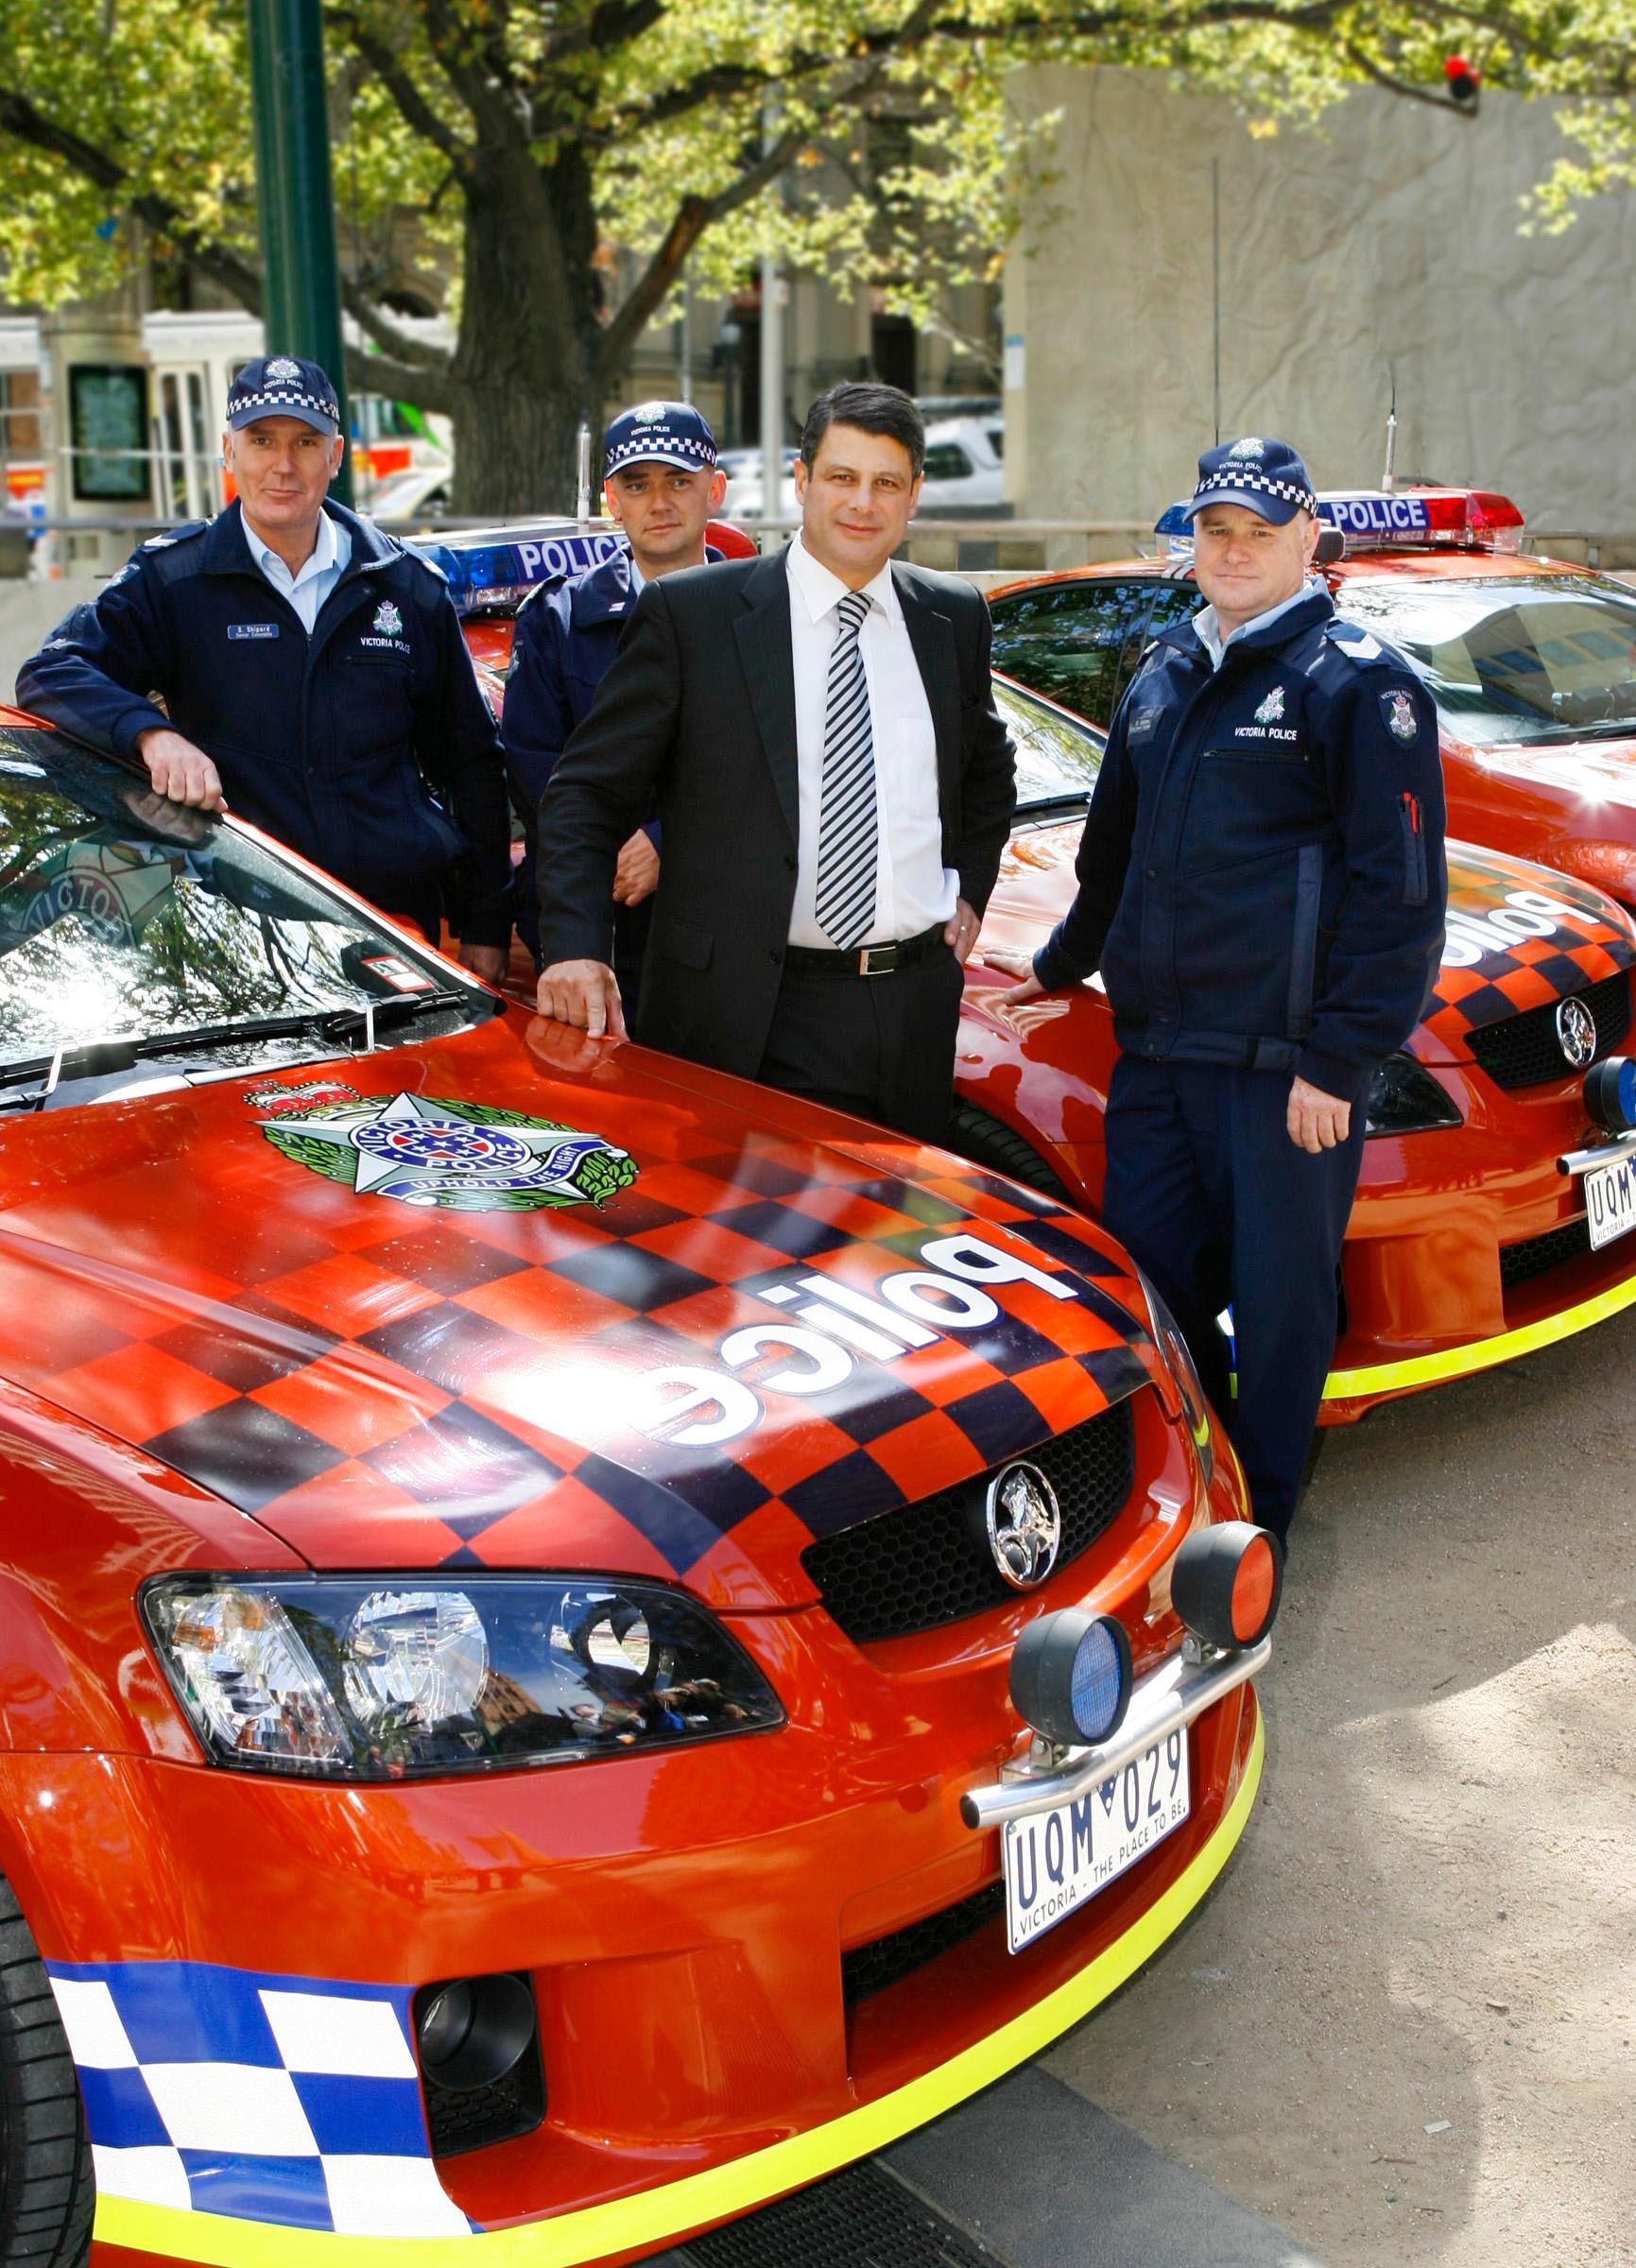 Holden SS Commodore Police Car